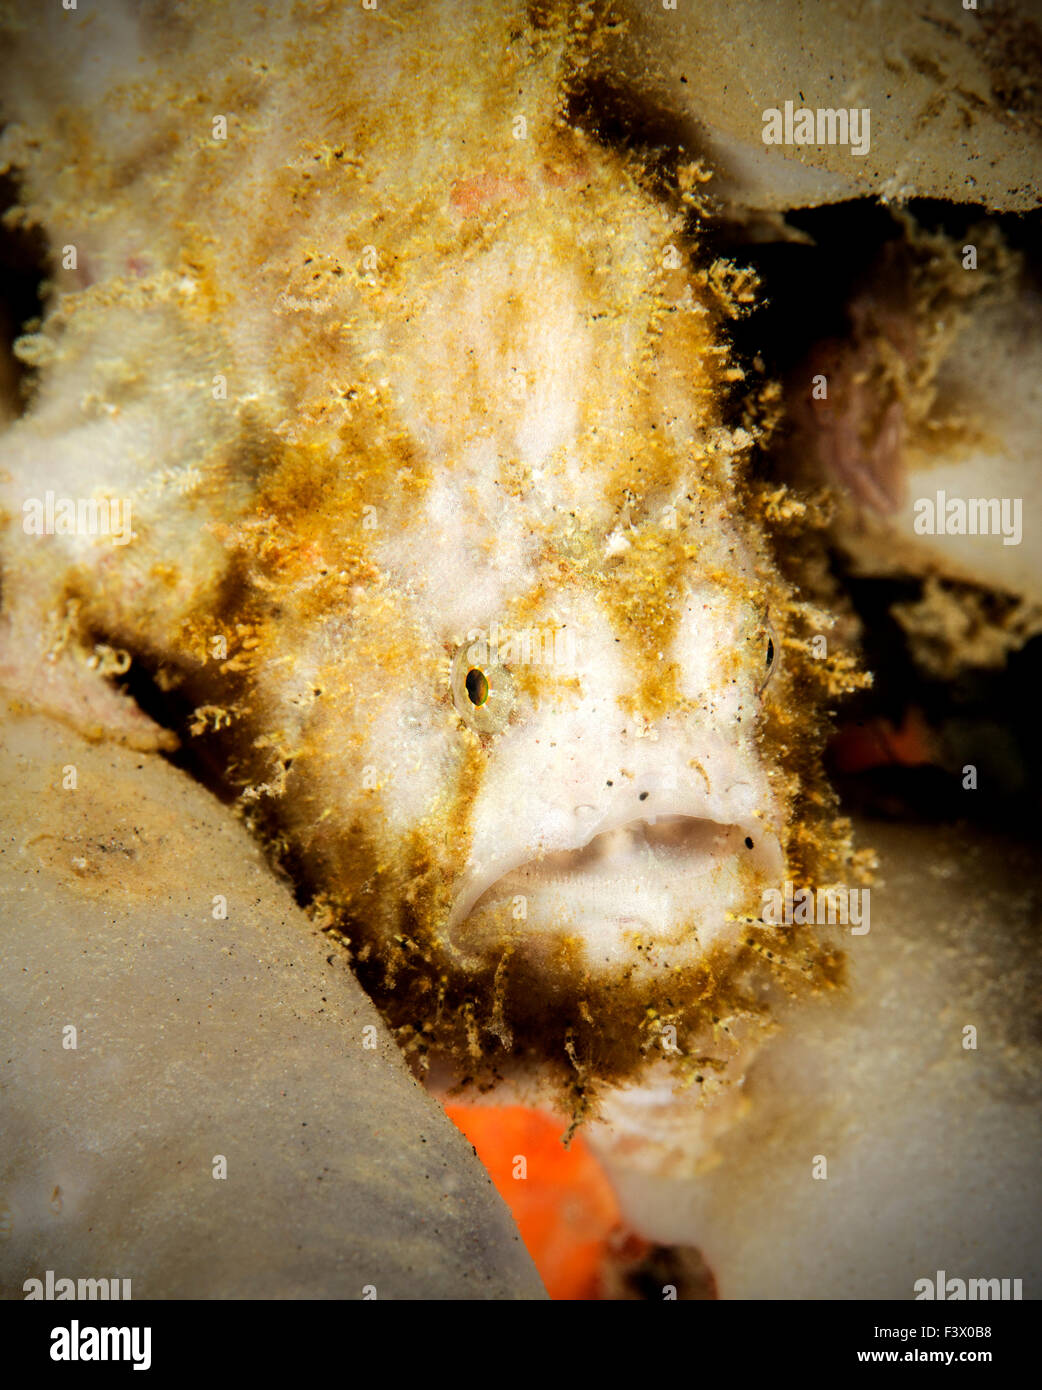 White Painted Frogfish Hiding in a Sponge Stock Photo